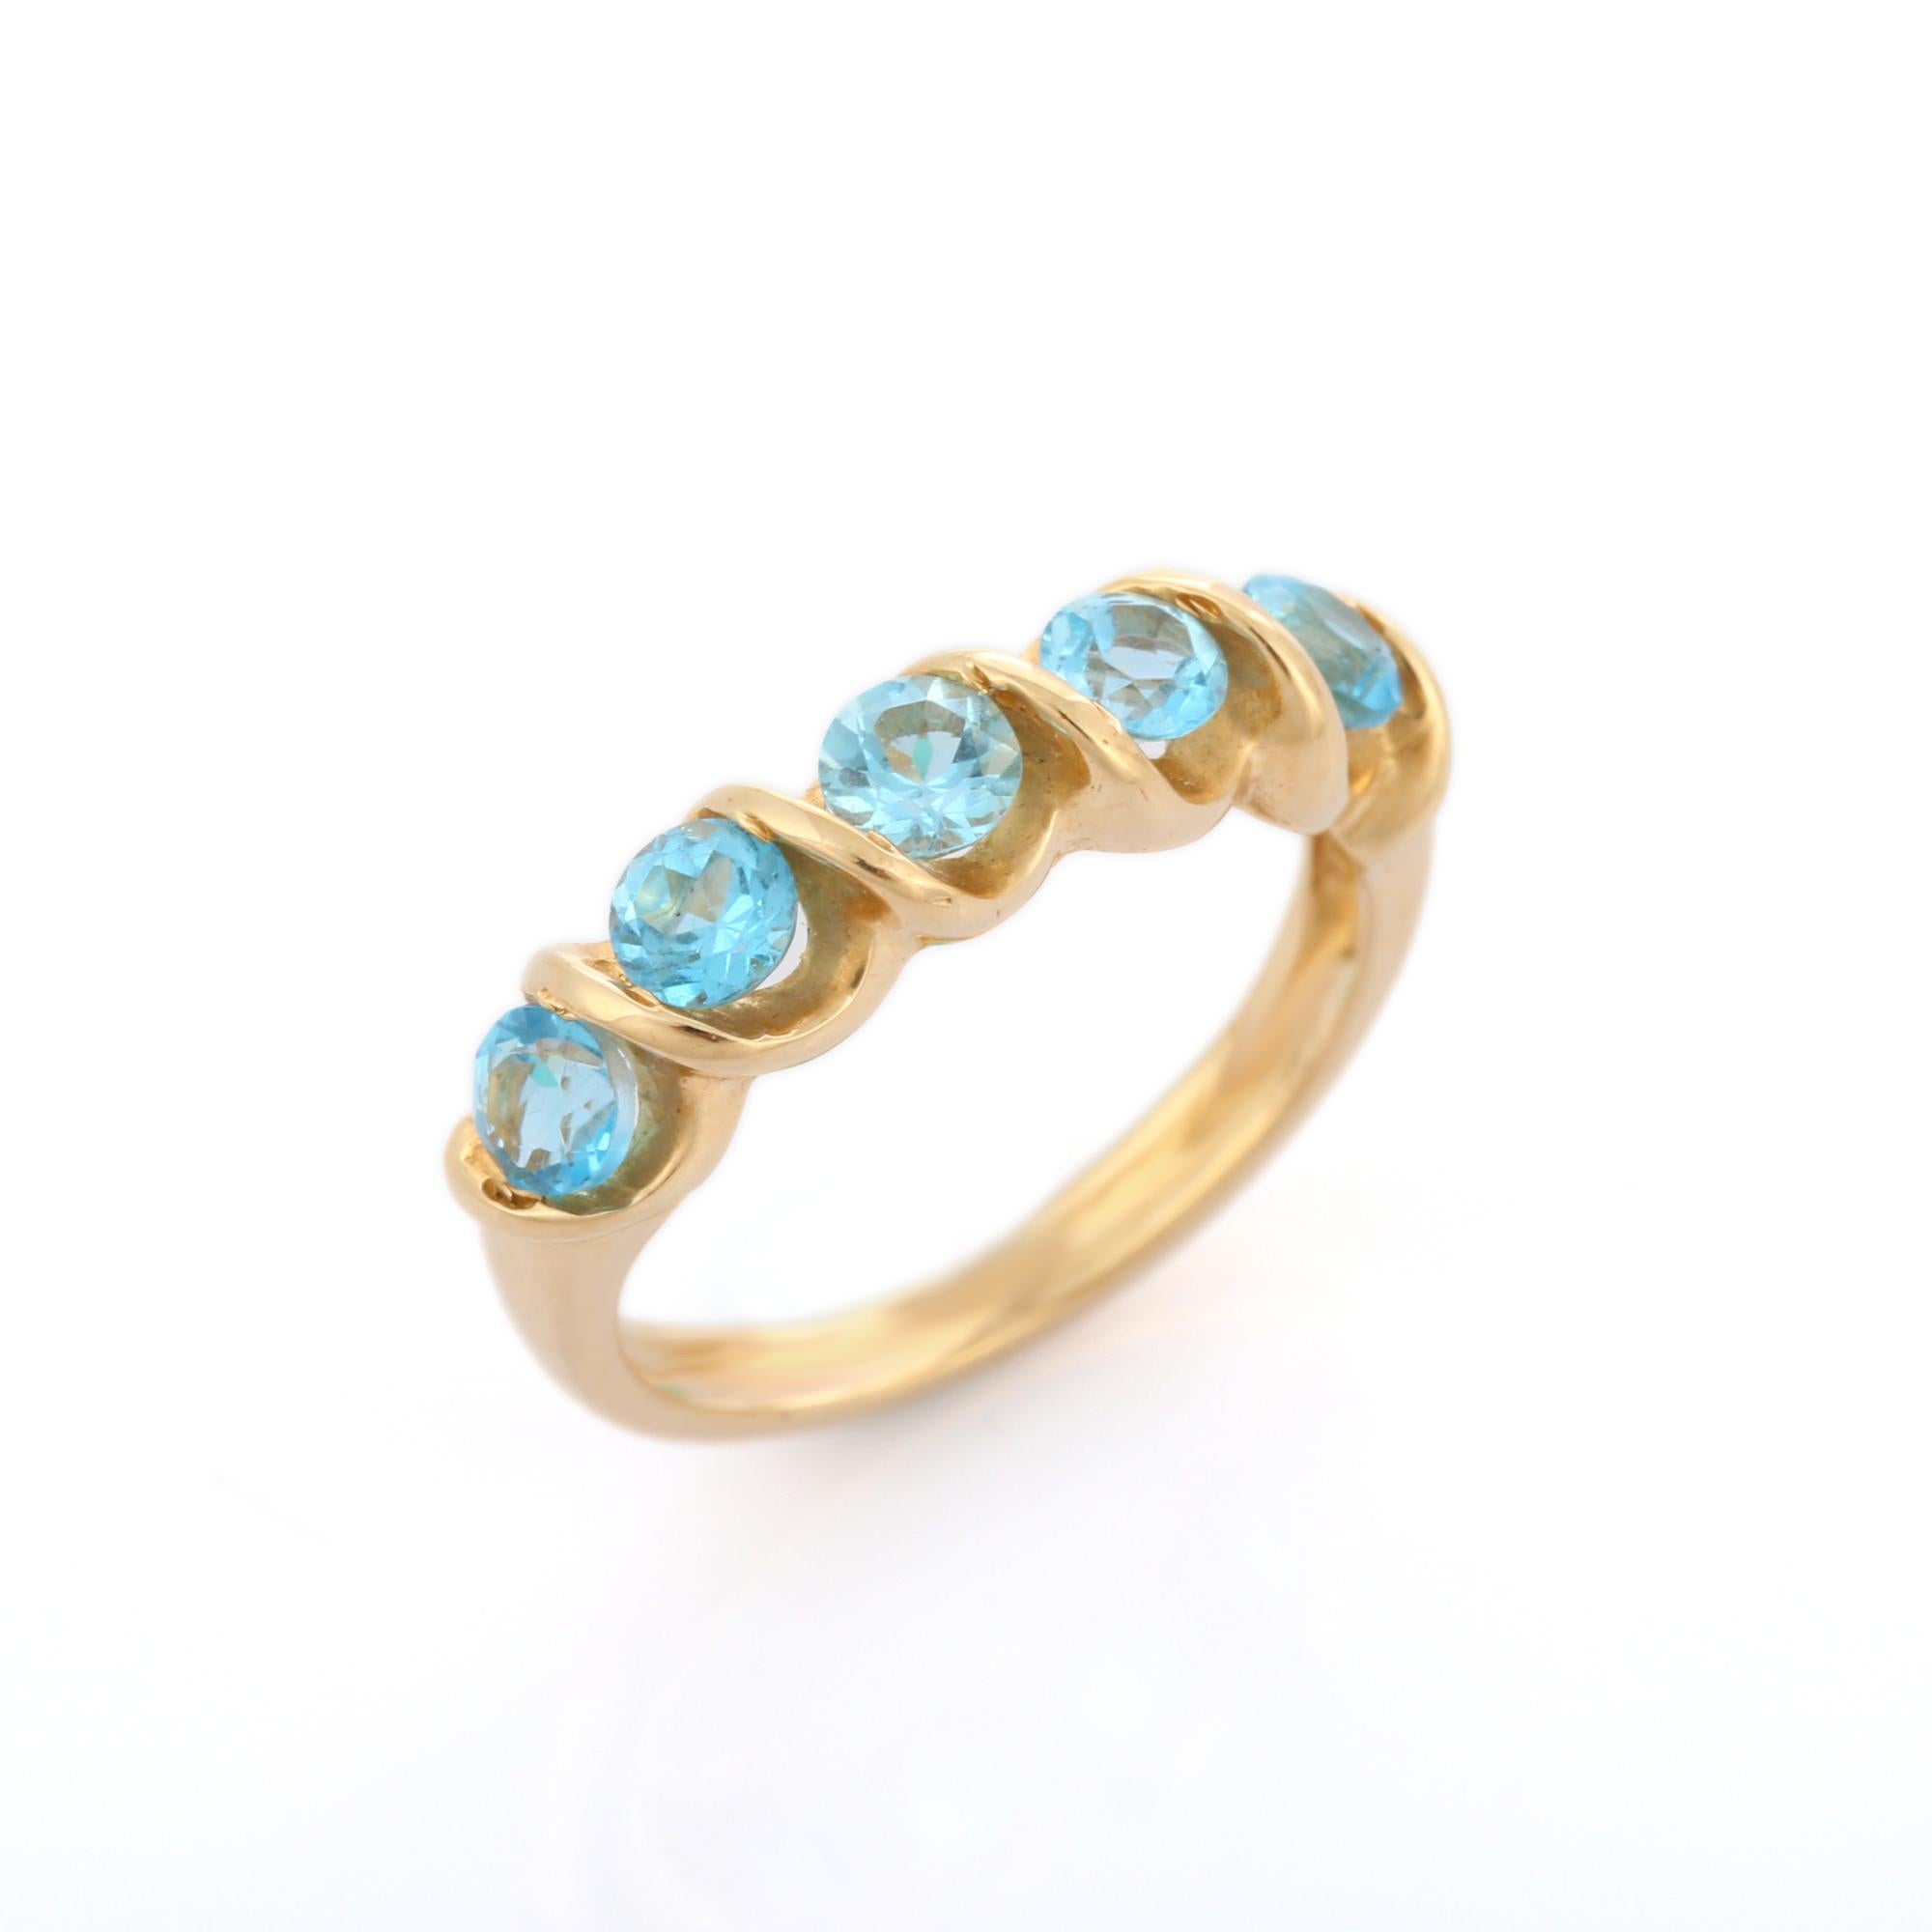 For Sale:  Blue Topaz Band Ring in 14k Solid Yellow Gold, December Birthstone Band 7